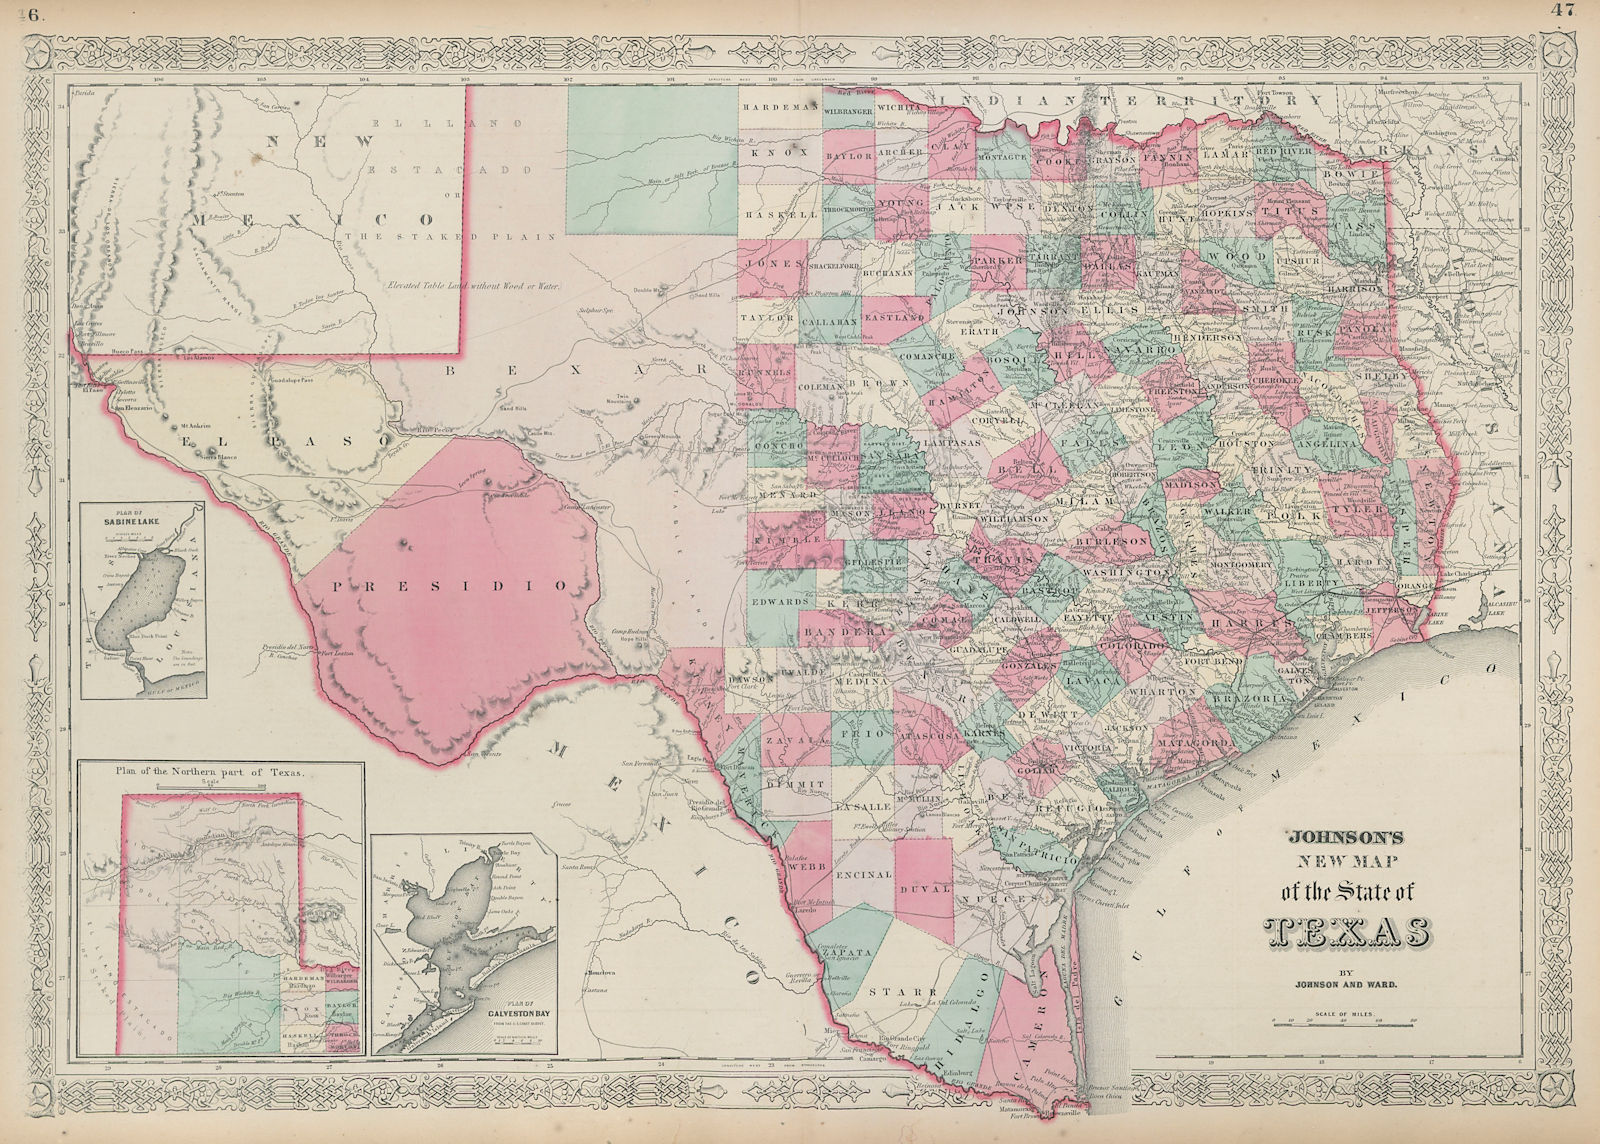 Johnson's New map of the State of Texas. US state map showing counties 1865